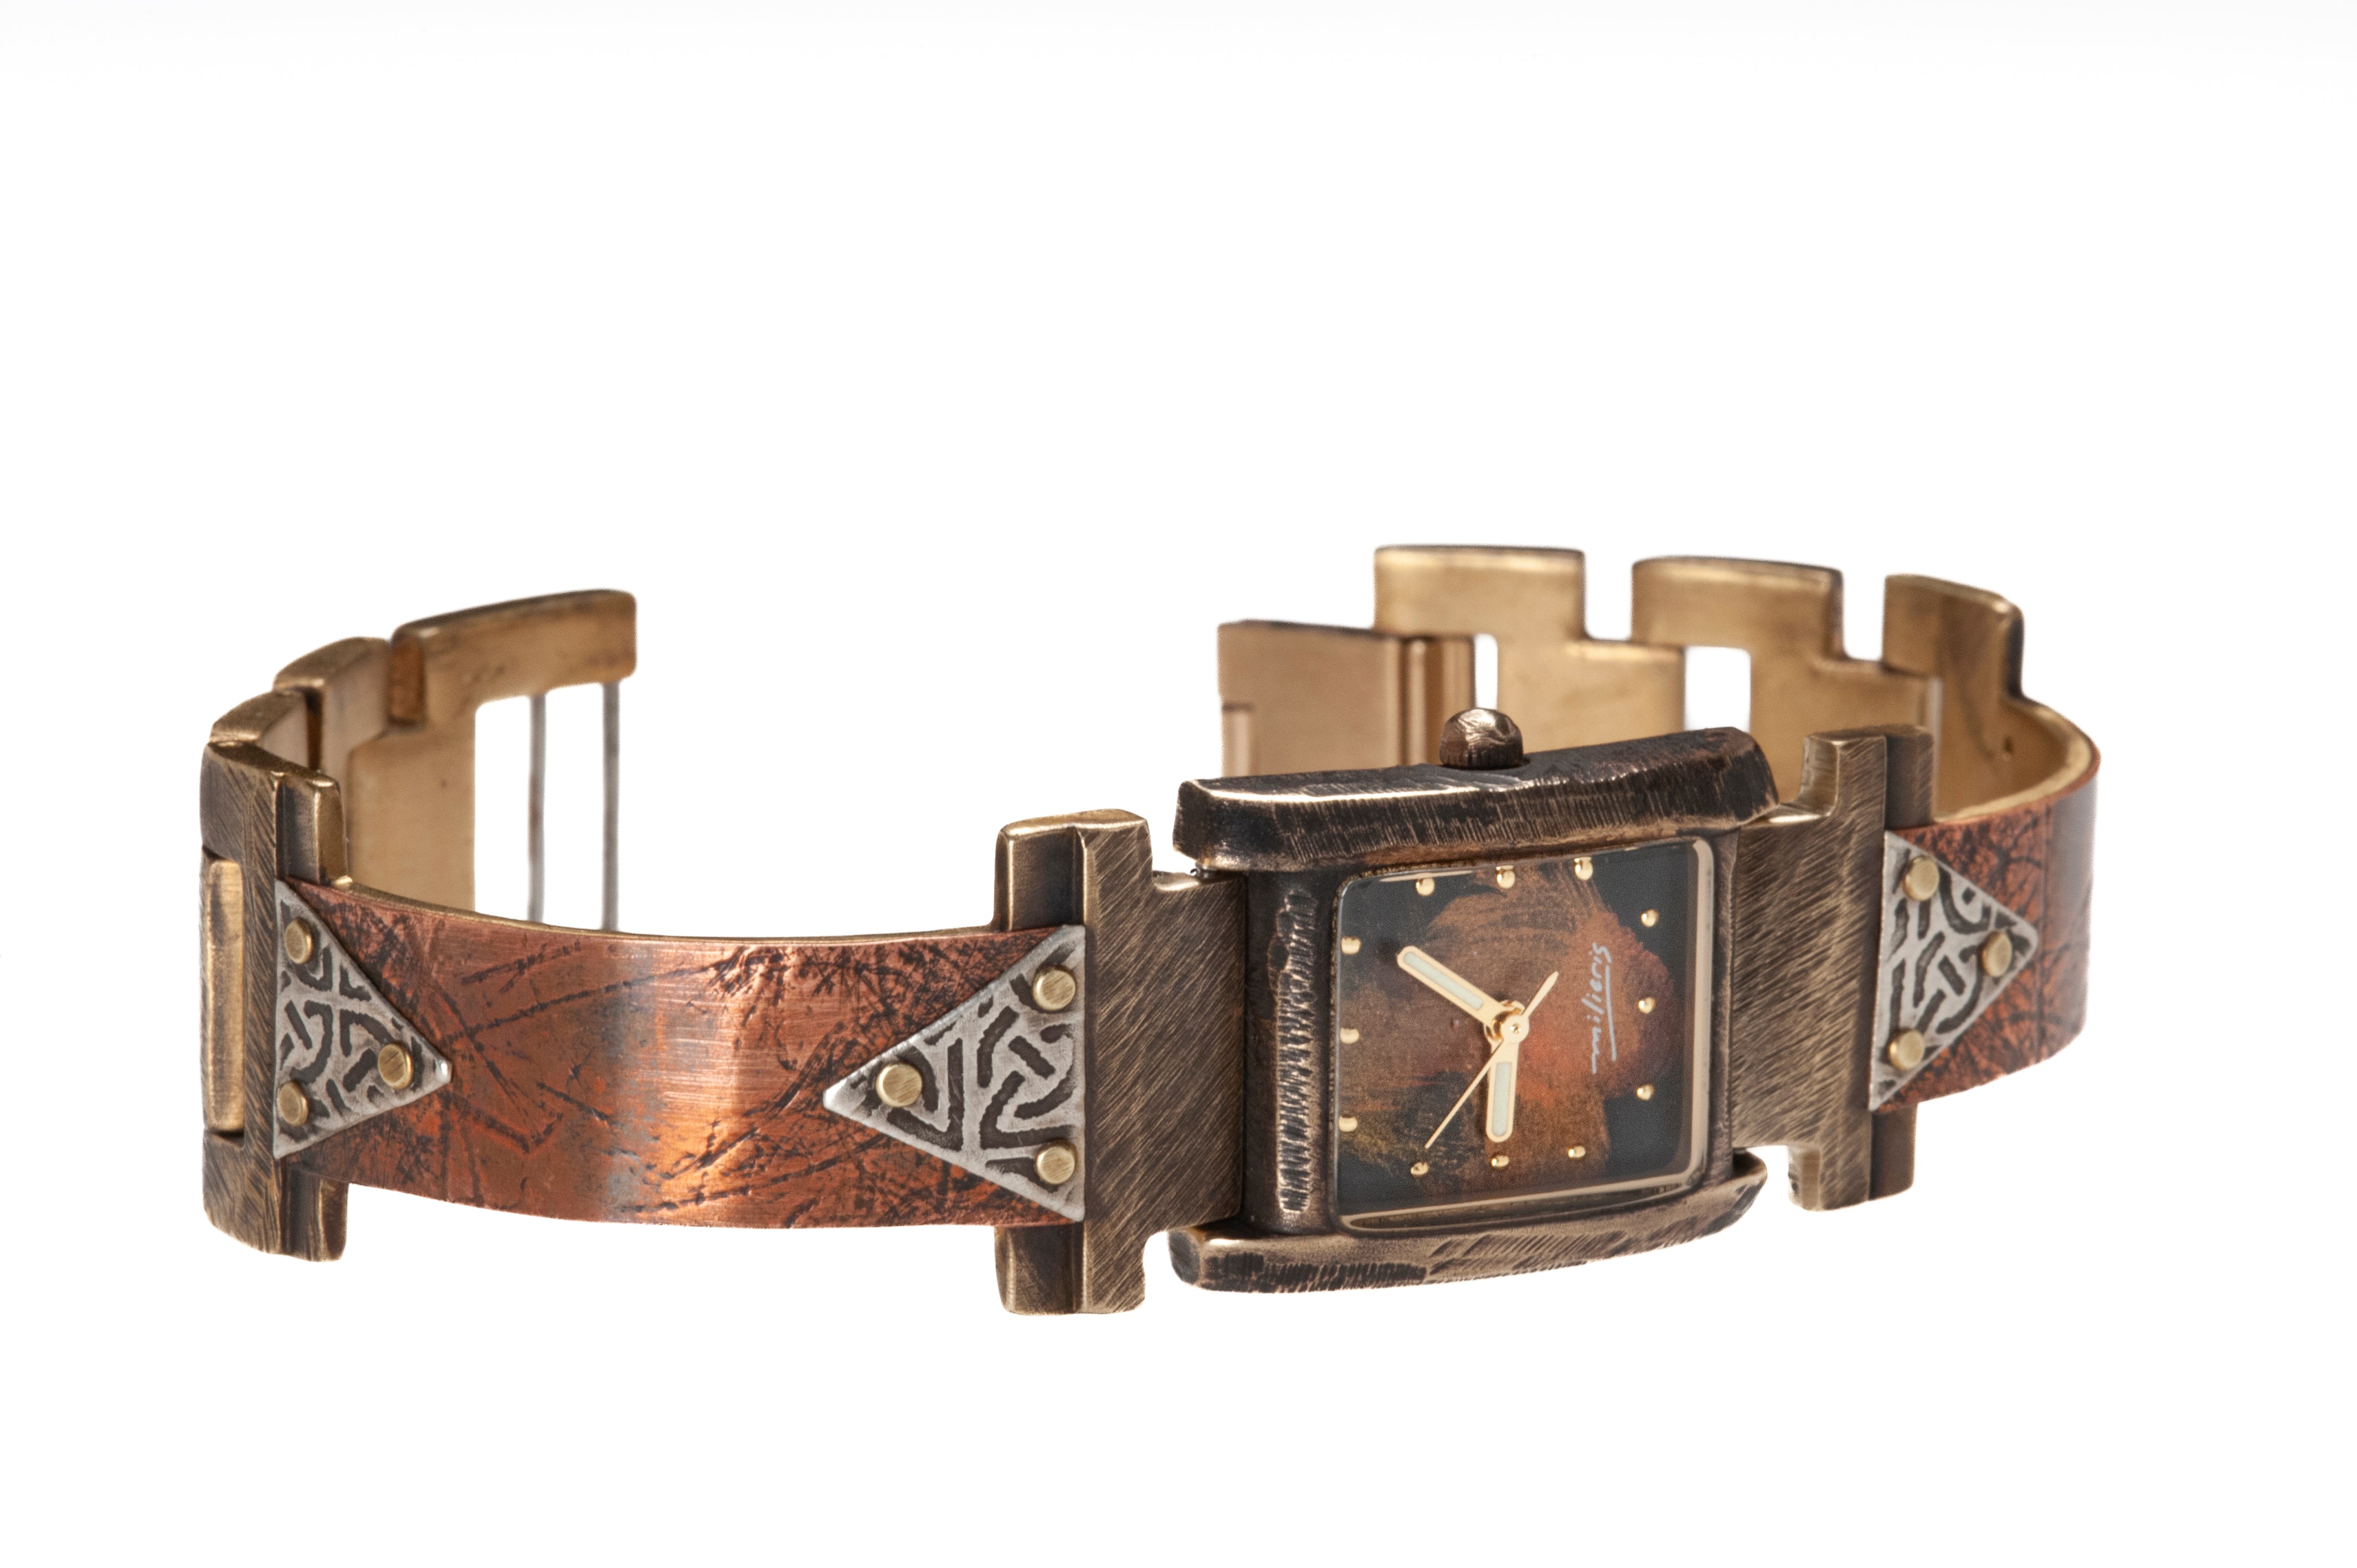 The Ponte Vecchio watch in copper and silver, facing right. Note the domed glass that marks the FLORENCE collection. Silver triangles embossed with Celtic designs are hand-riveted to both ends of the copper watch band which bears the patterns of handmade coconut paper pressed onto the metal.